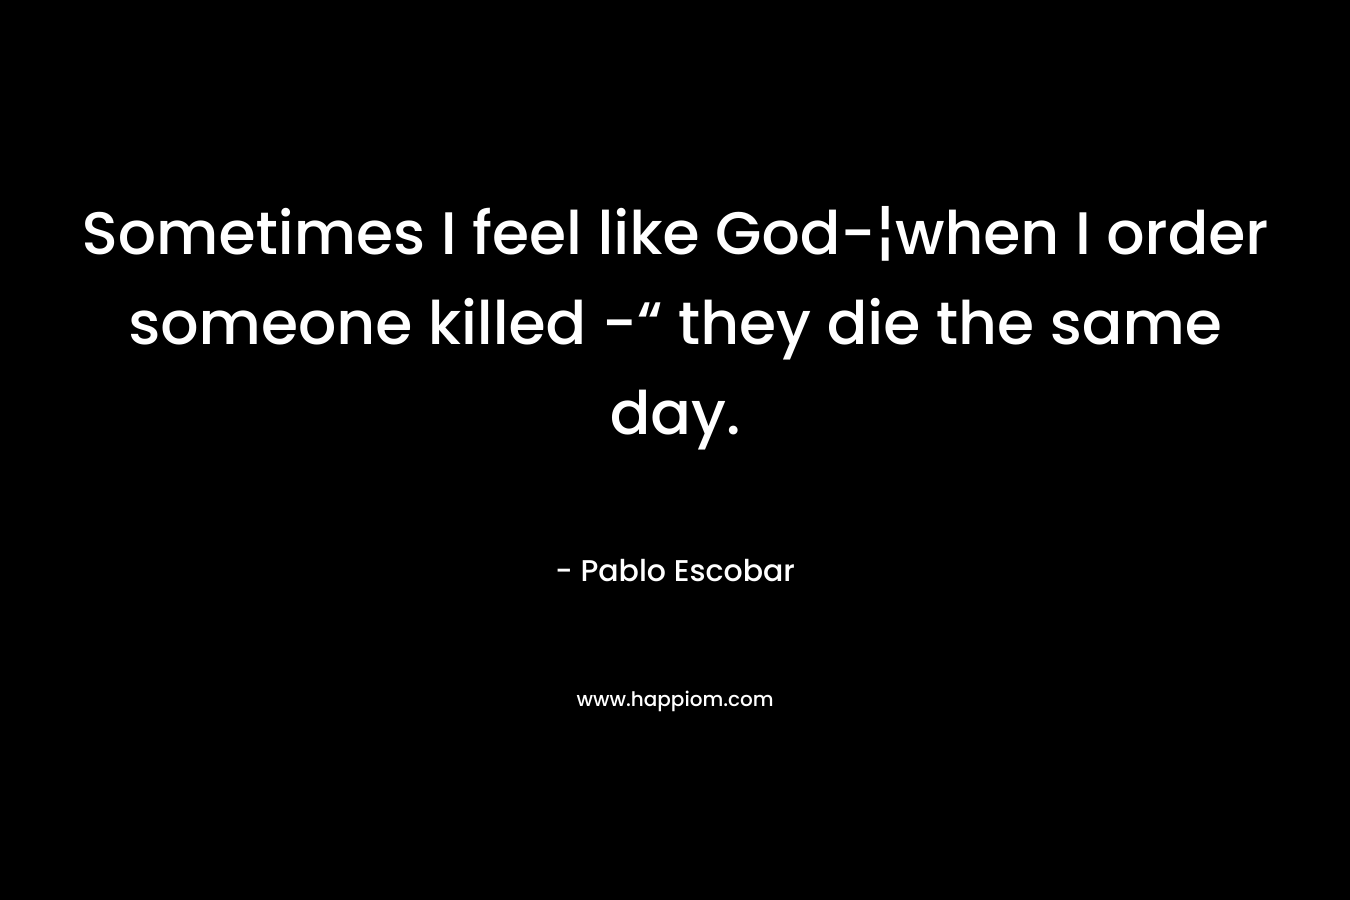 Sometimes I feel like God-¦when I order someone killed -“ they die the same day. – Pablo Escobar